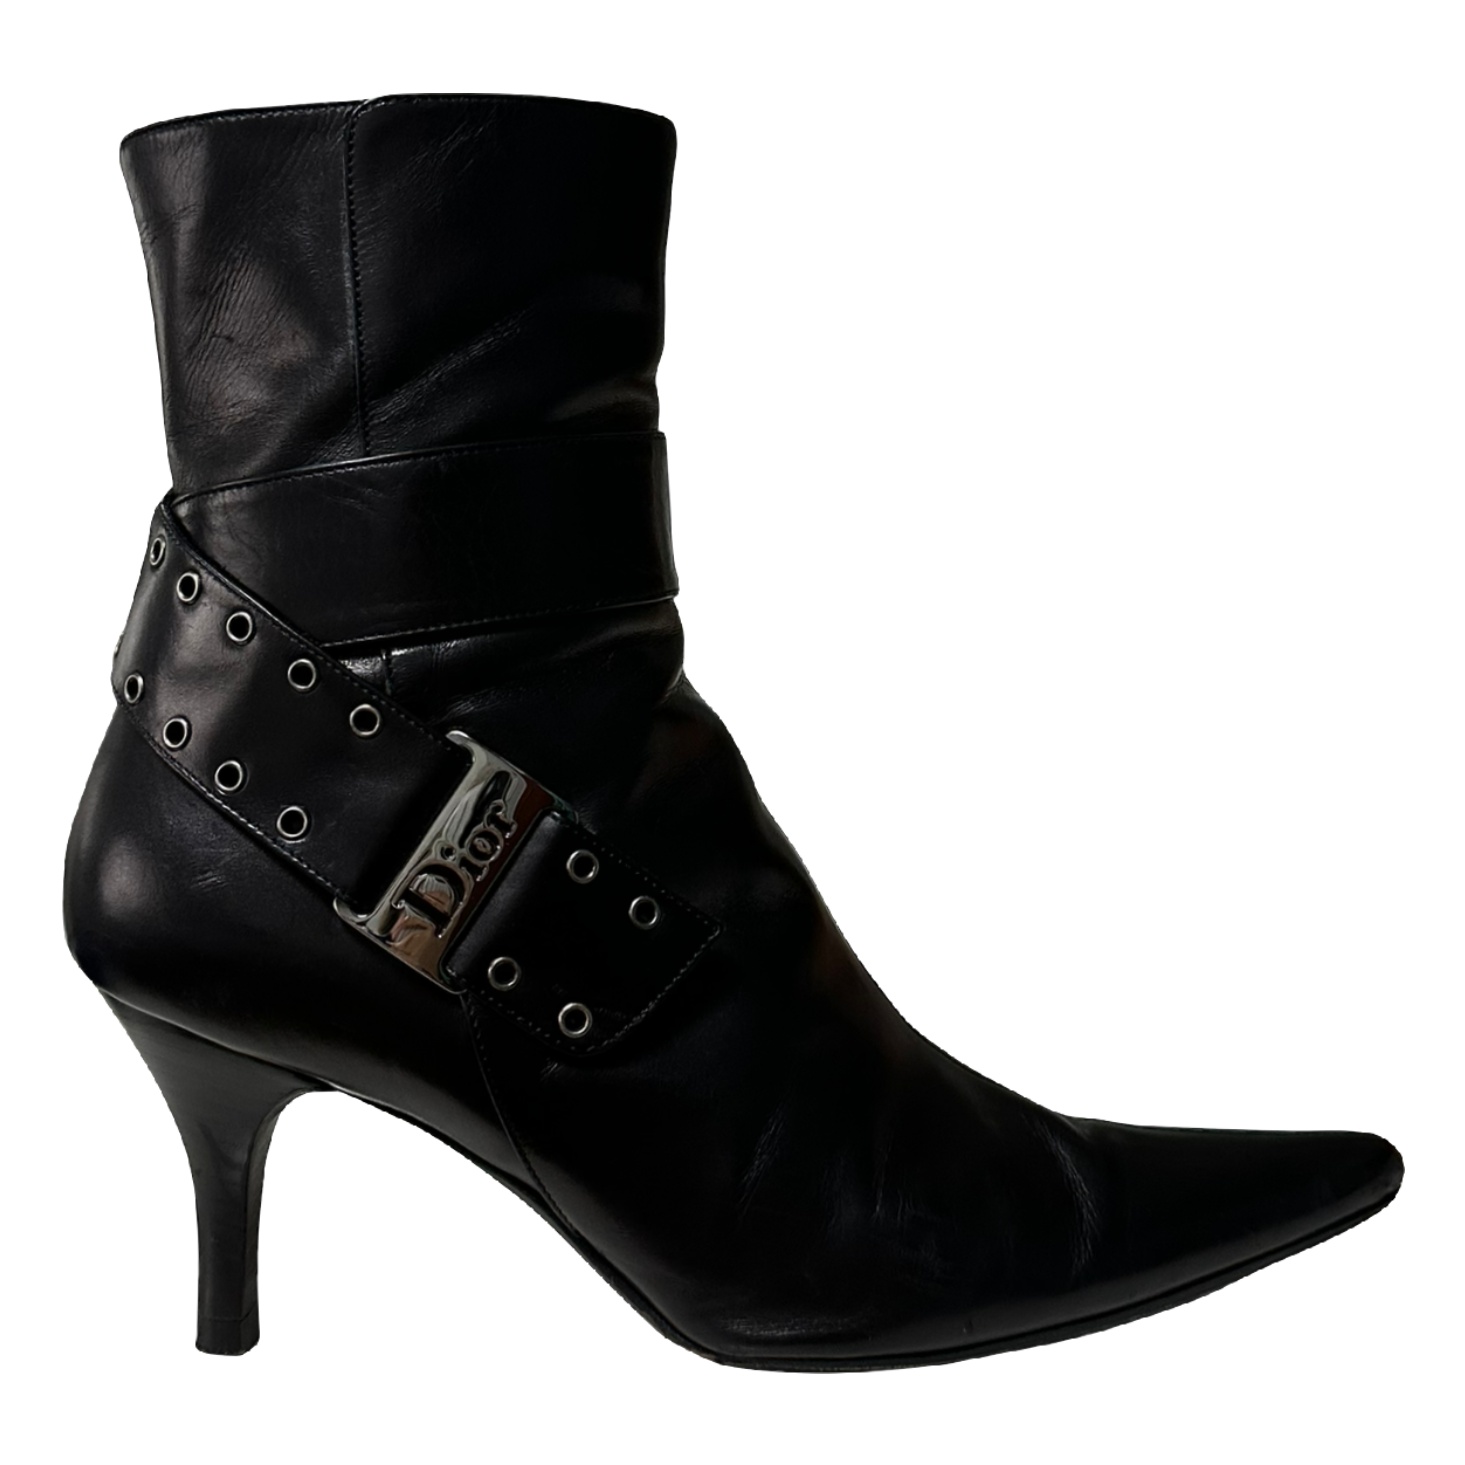 CHRISTIAN DIOR Fall Winter 2004 Leather Buckle Ankle Boots - 4